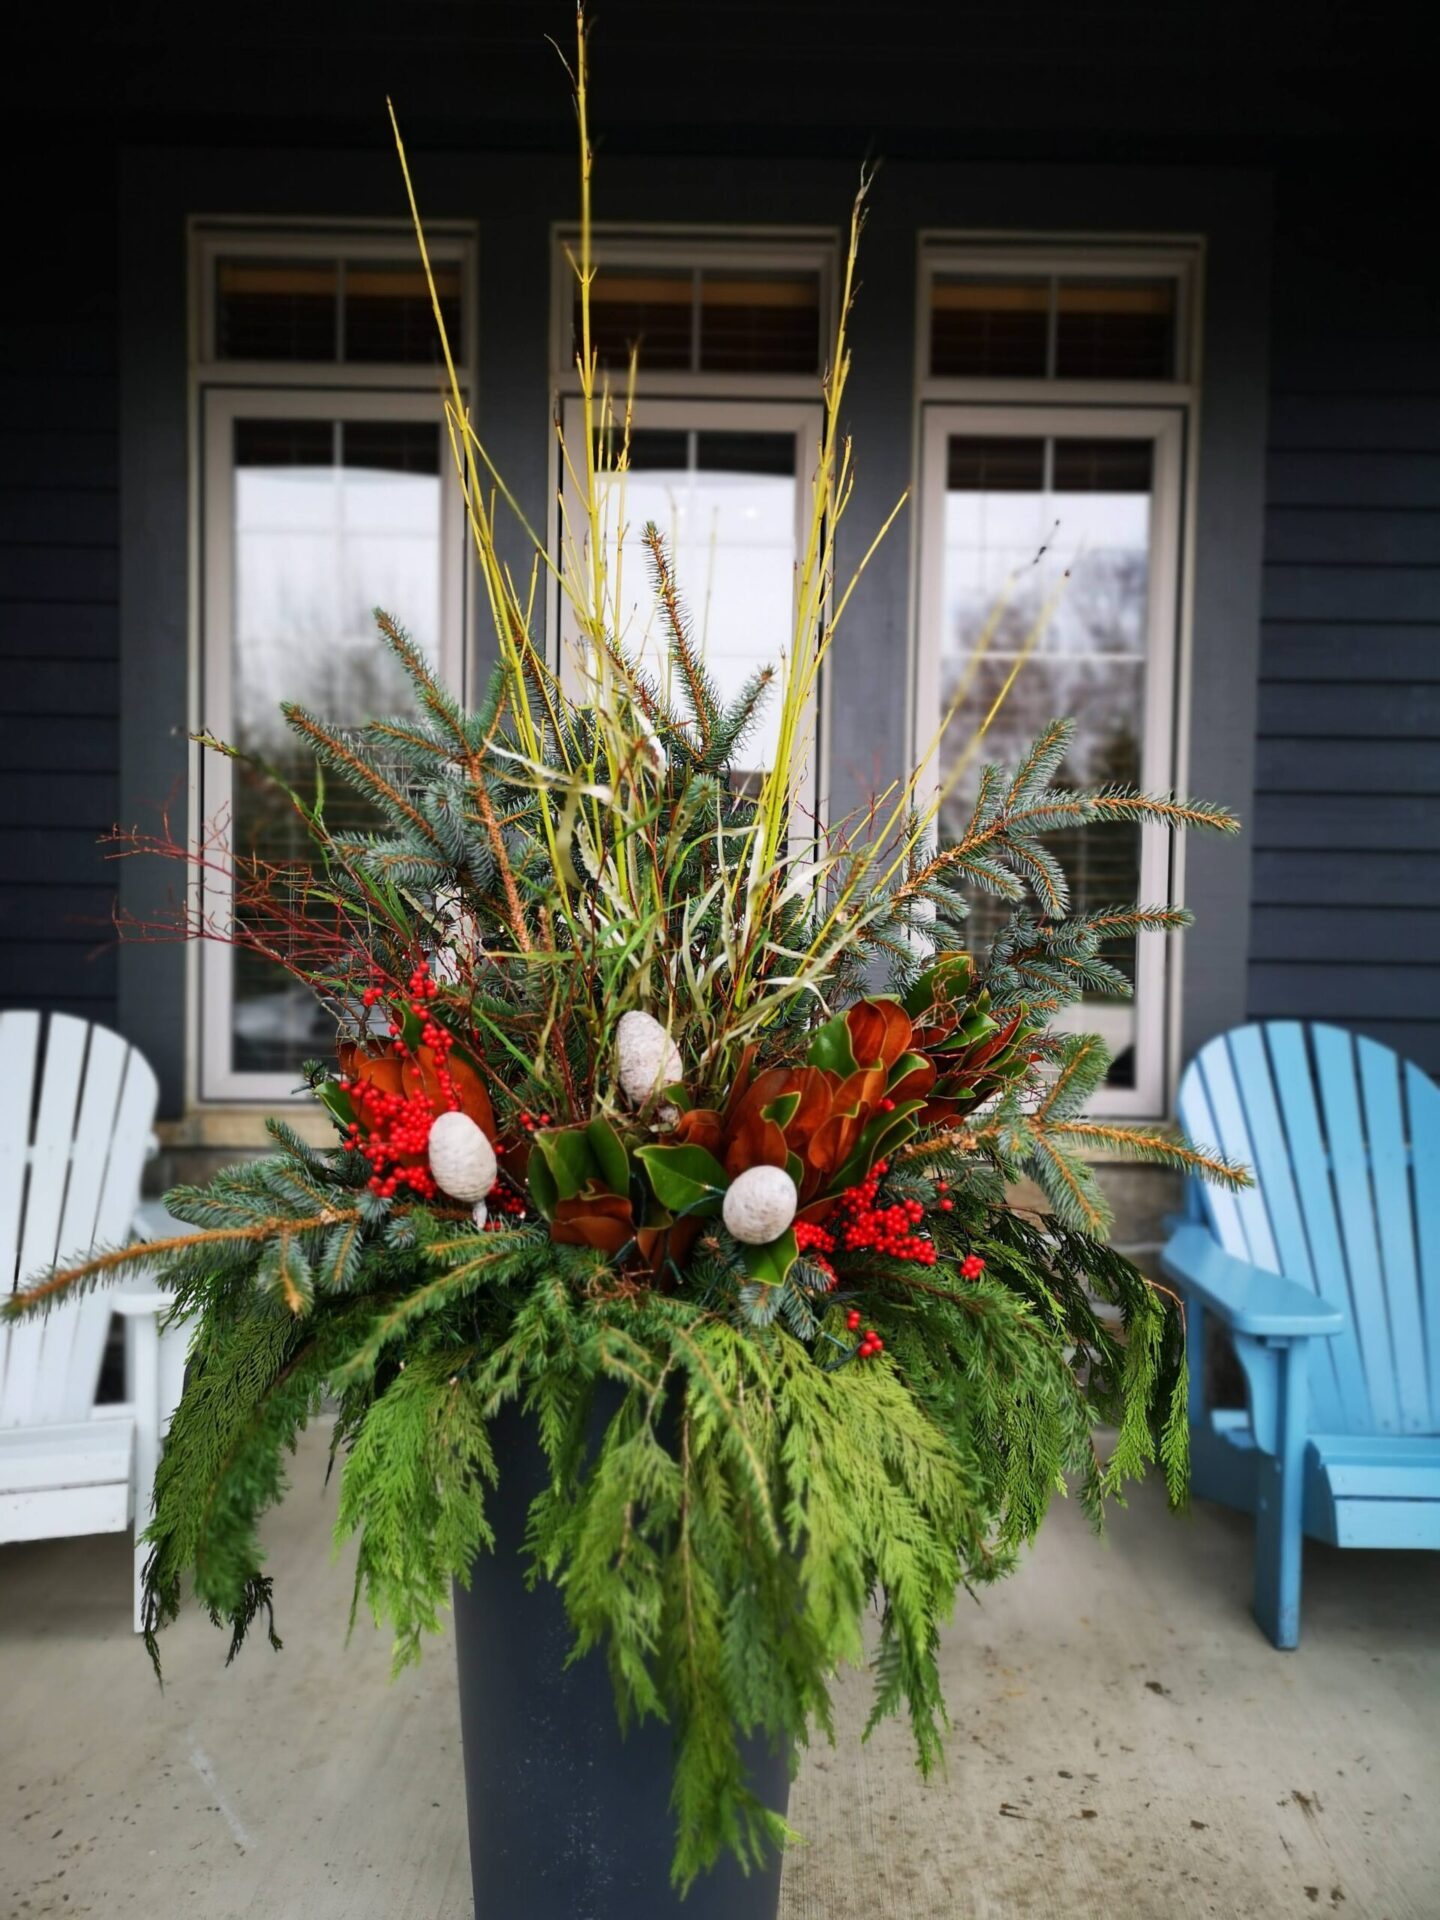 A vibrant floral arrangement in a planter with red berries, green foliage, and white accents, set against a porch with blue chairs and a dark house.